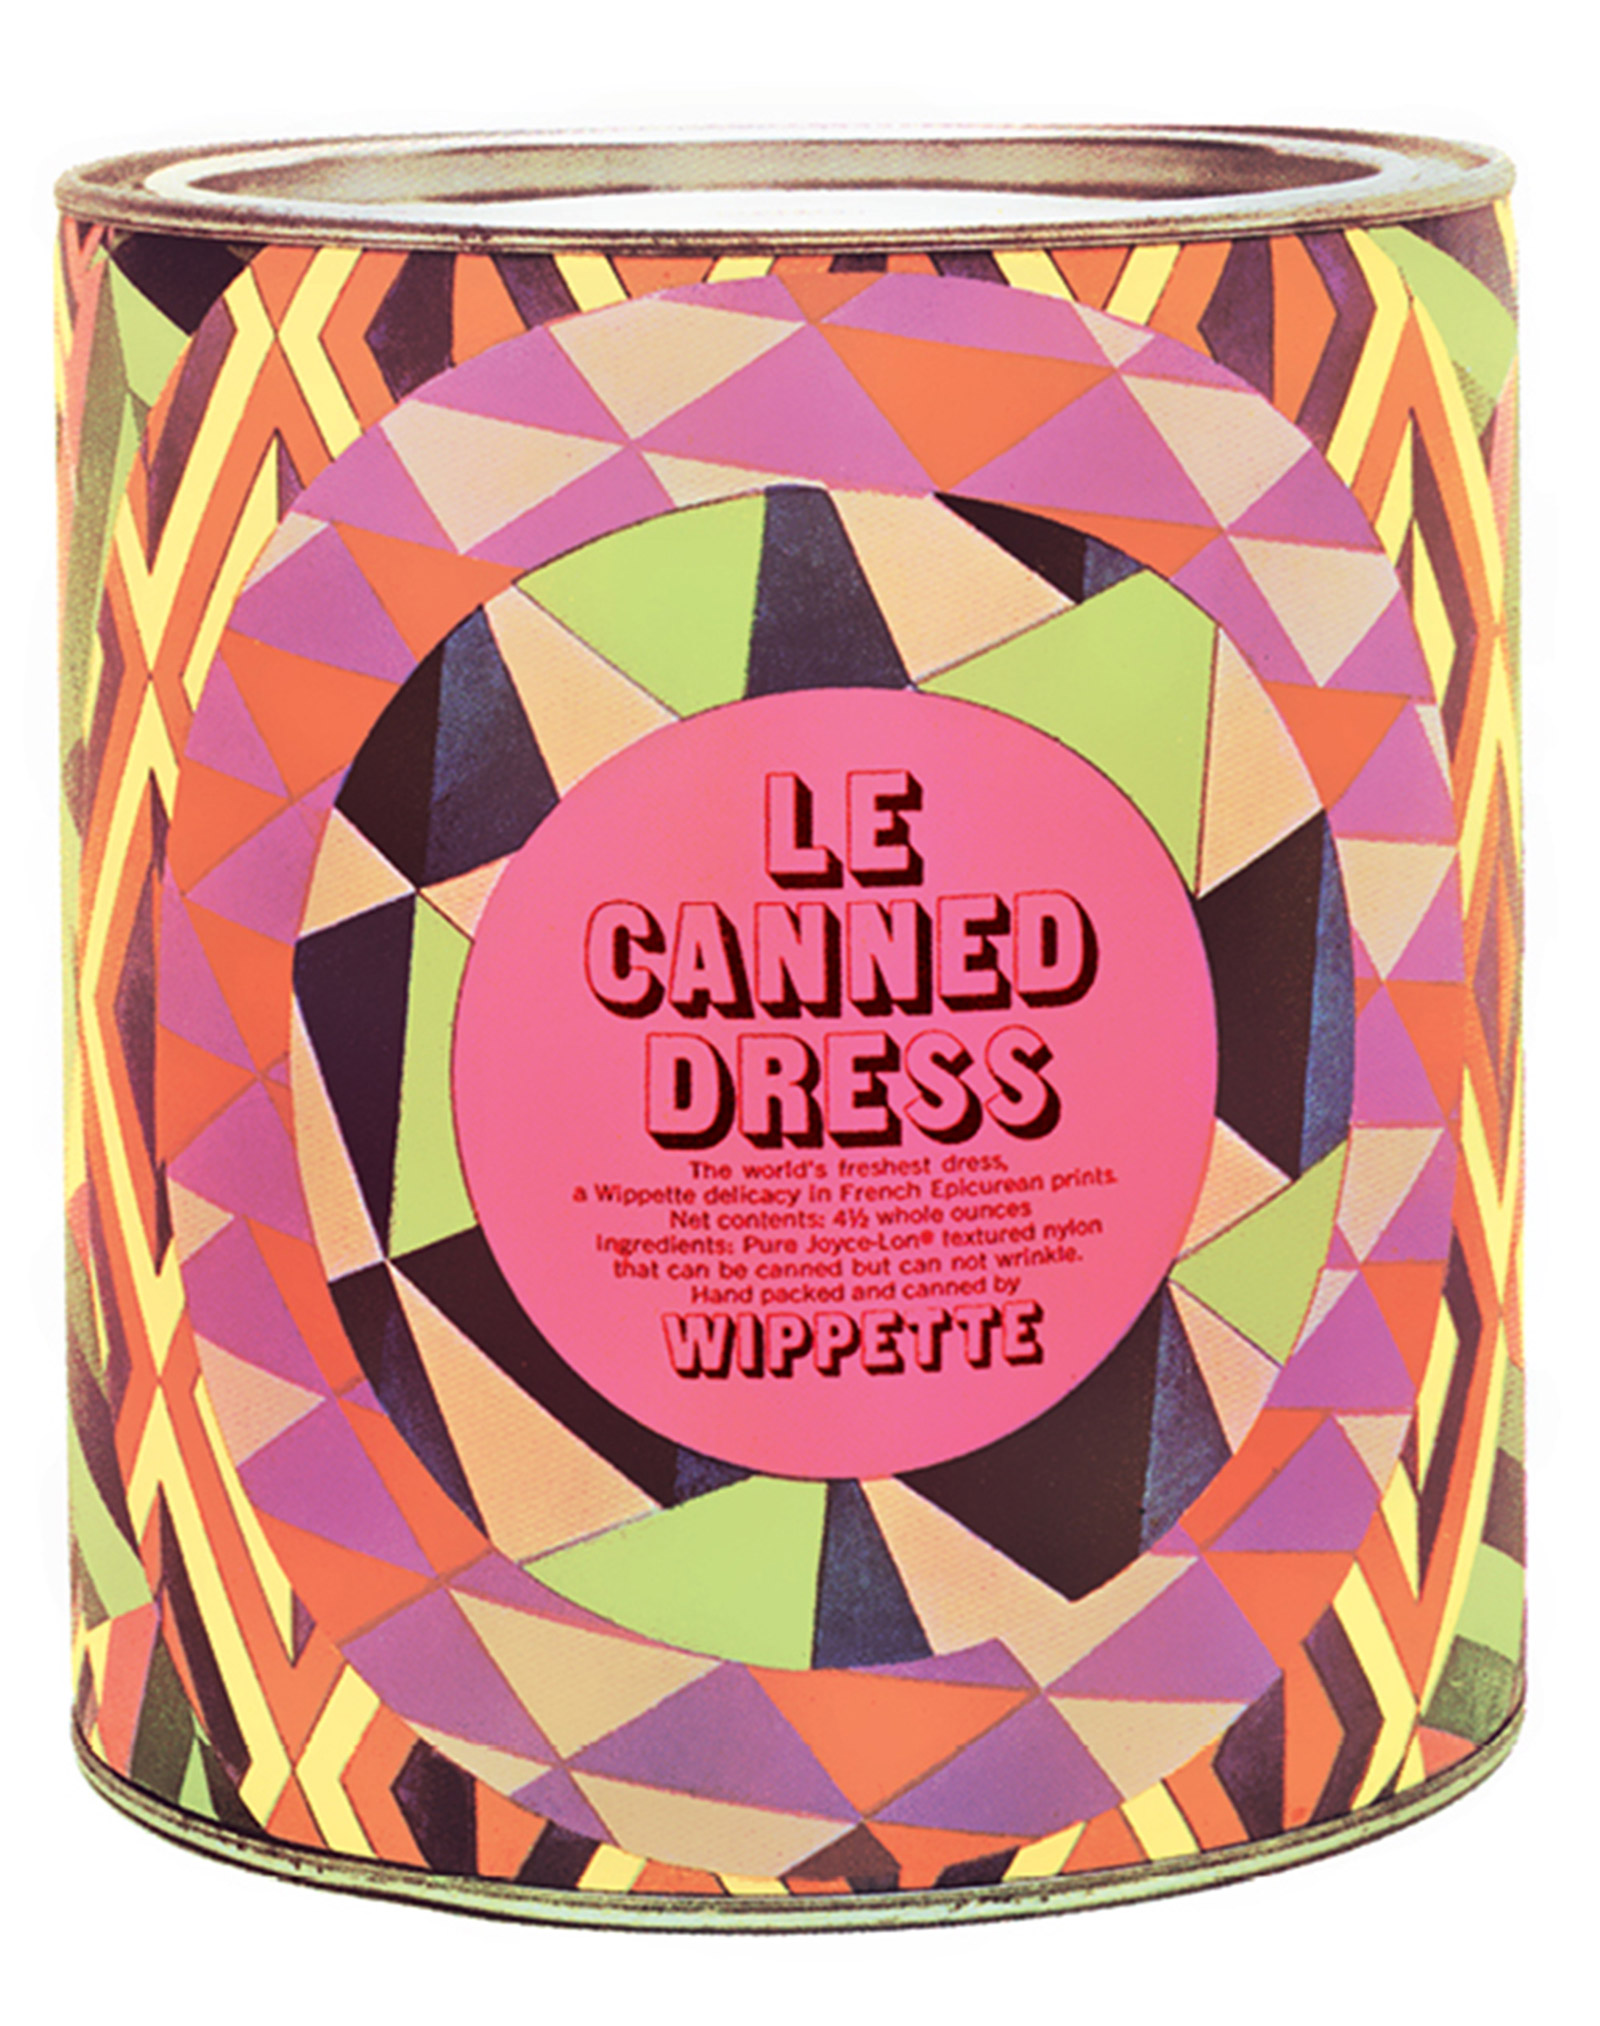 A photograph of a fluorescent patterned can of Le Canned Dress, produced by Wippette, from circa nineteen sixty-eight .